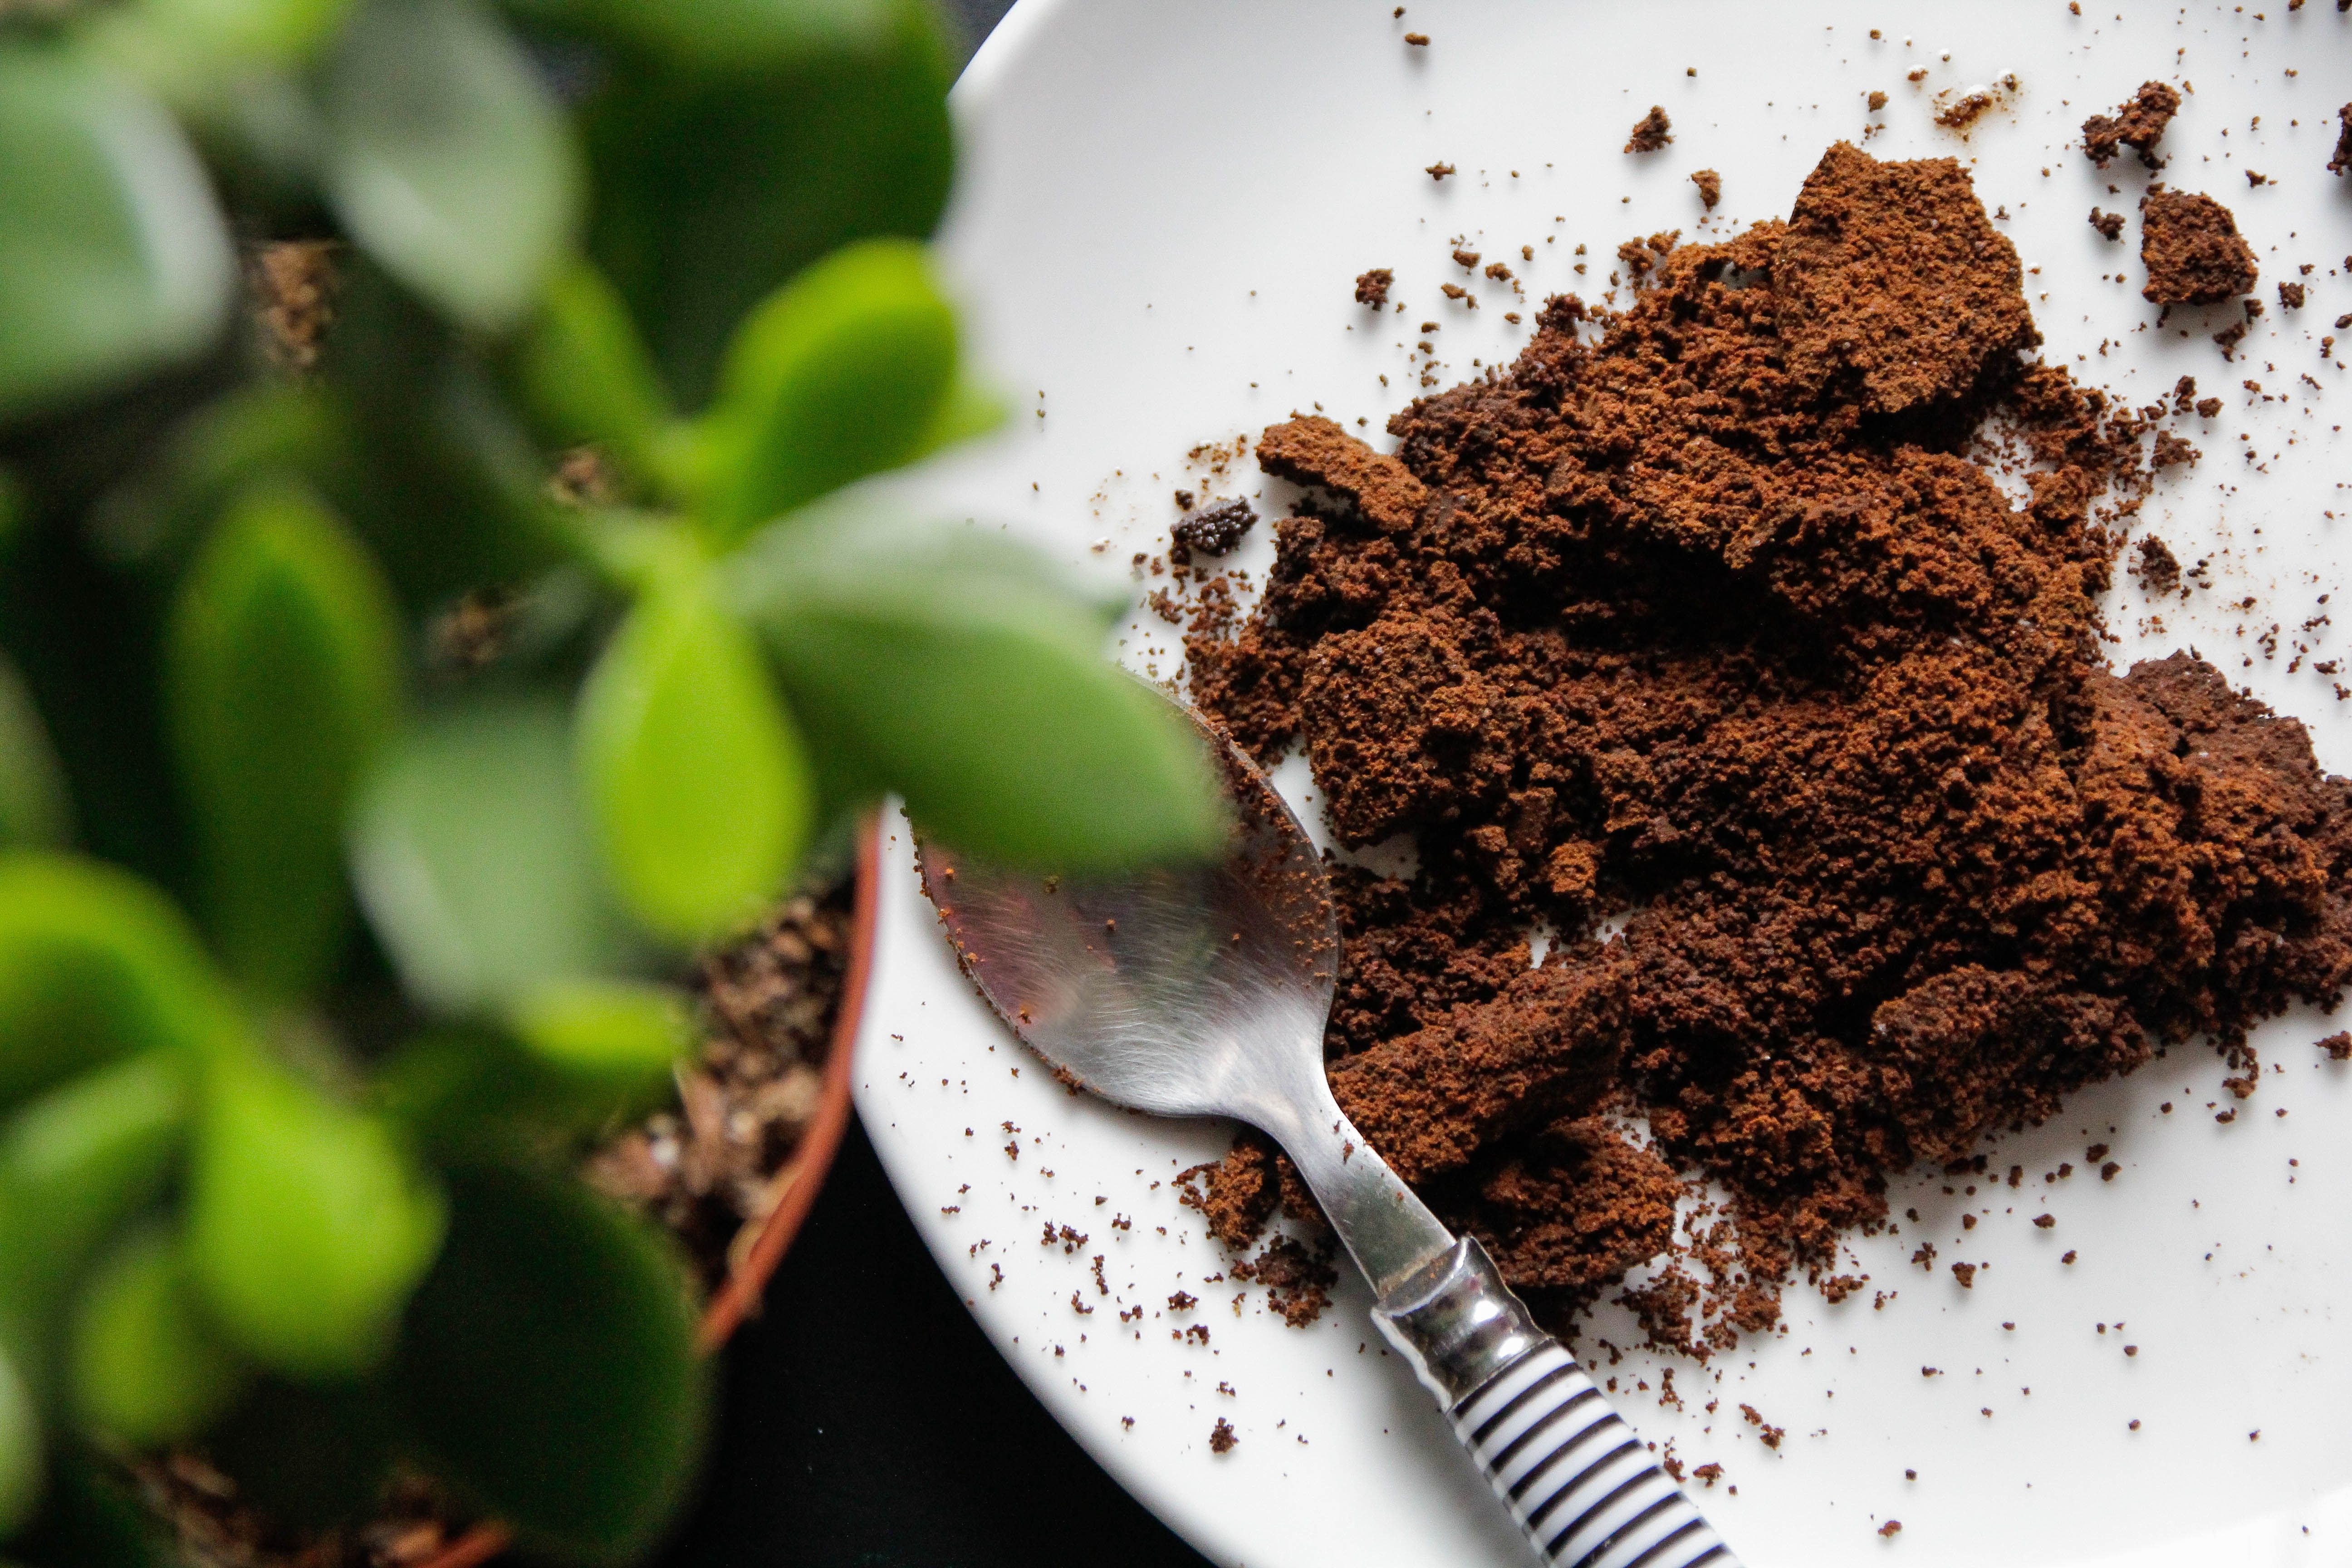 Yes, You Can Use Coffee Grounds to Fertilize Your House Plants